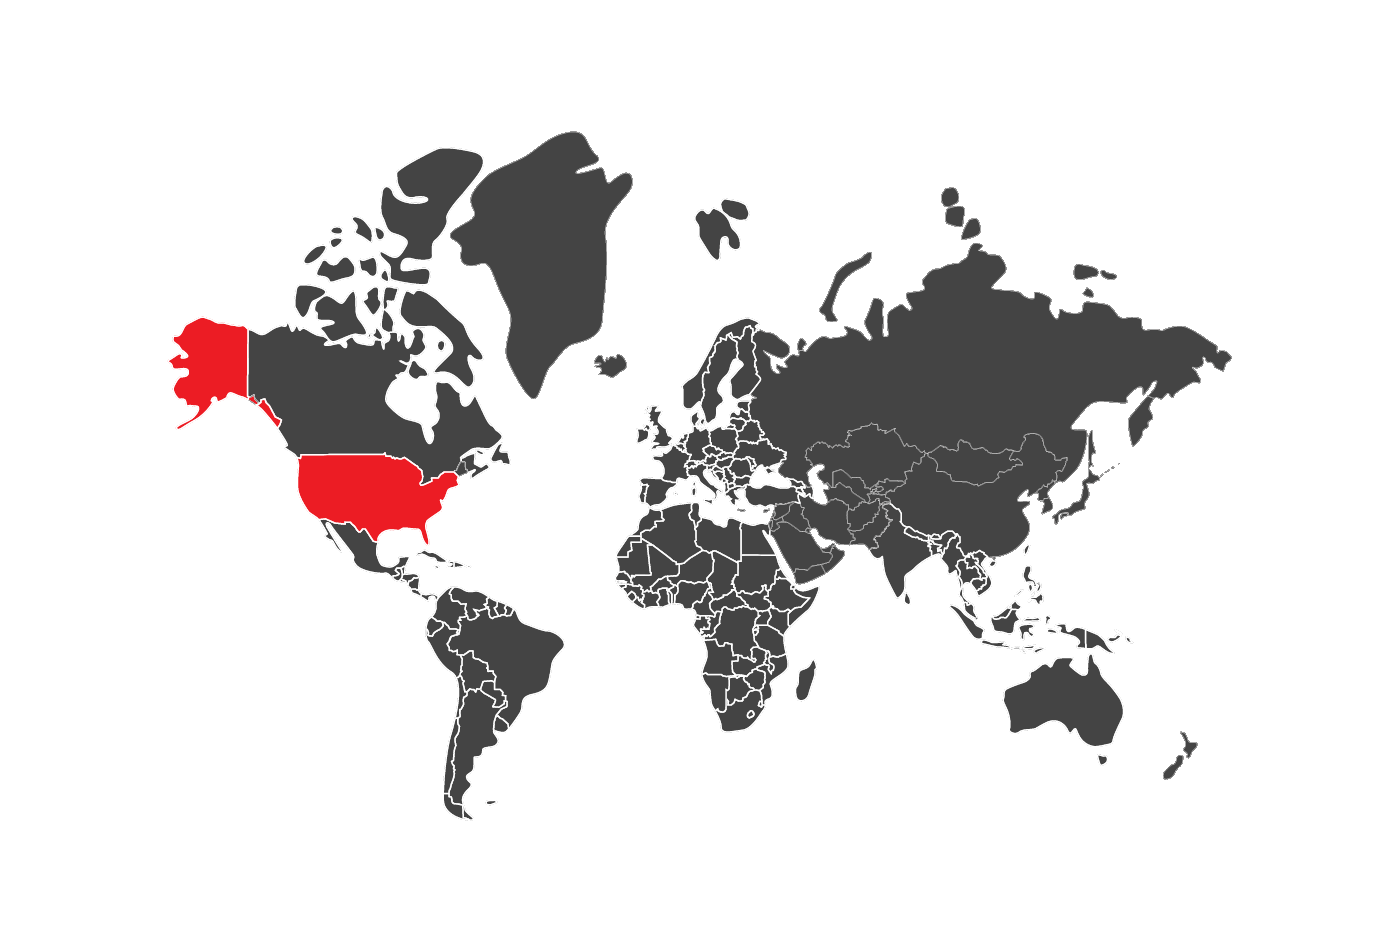 map of the world with regions periodically highlighted in red